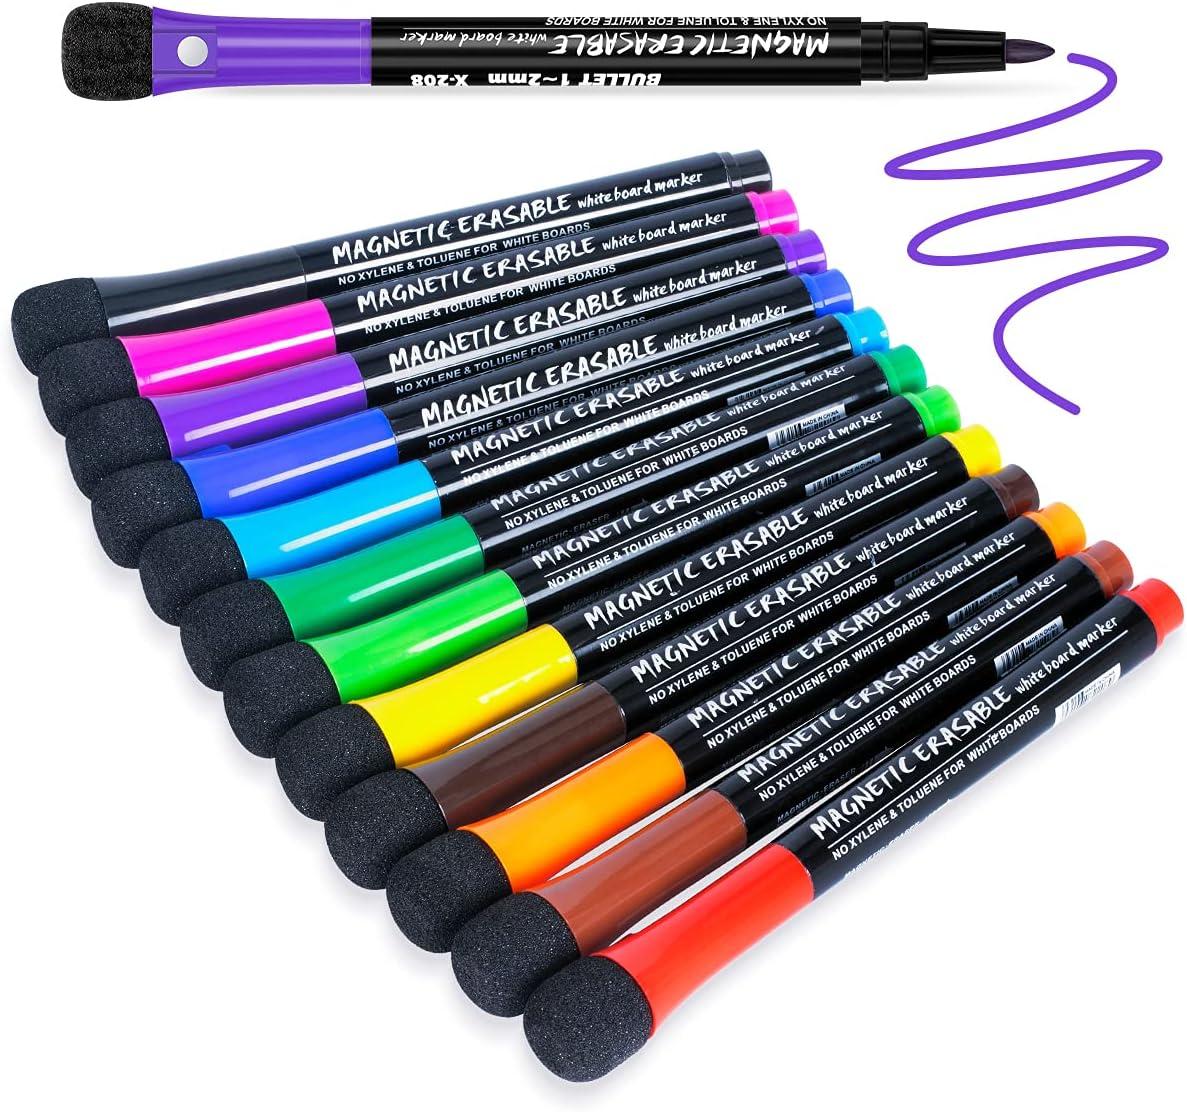 jr white magnetic dry erase markers fine 12 colors white board markers  jr.white b08x2n134r